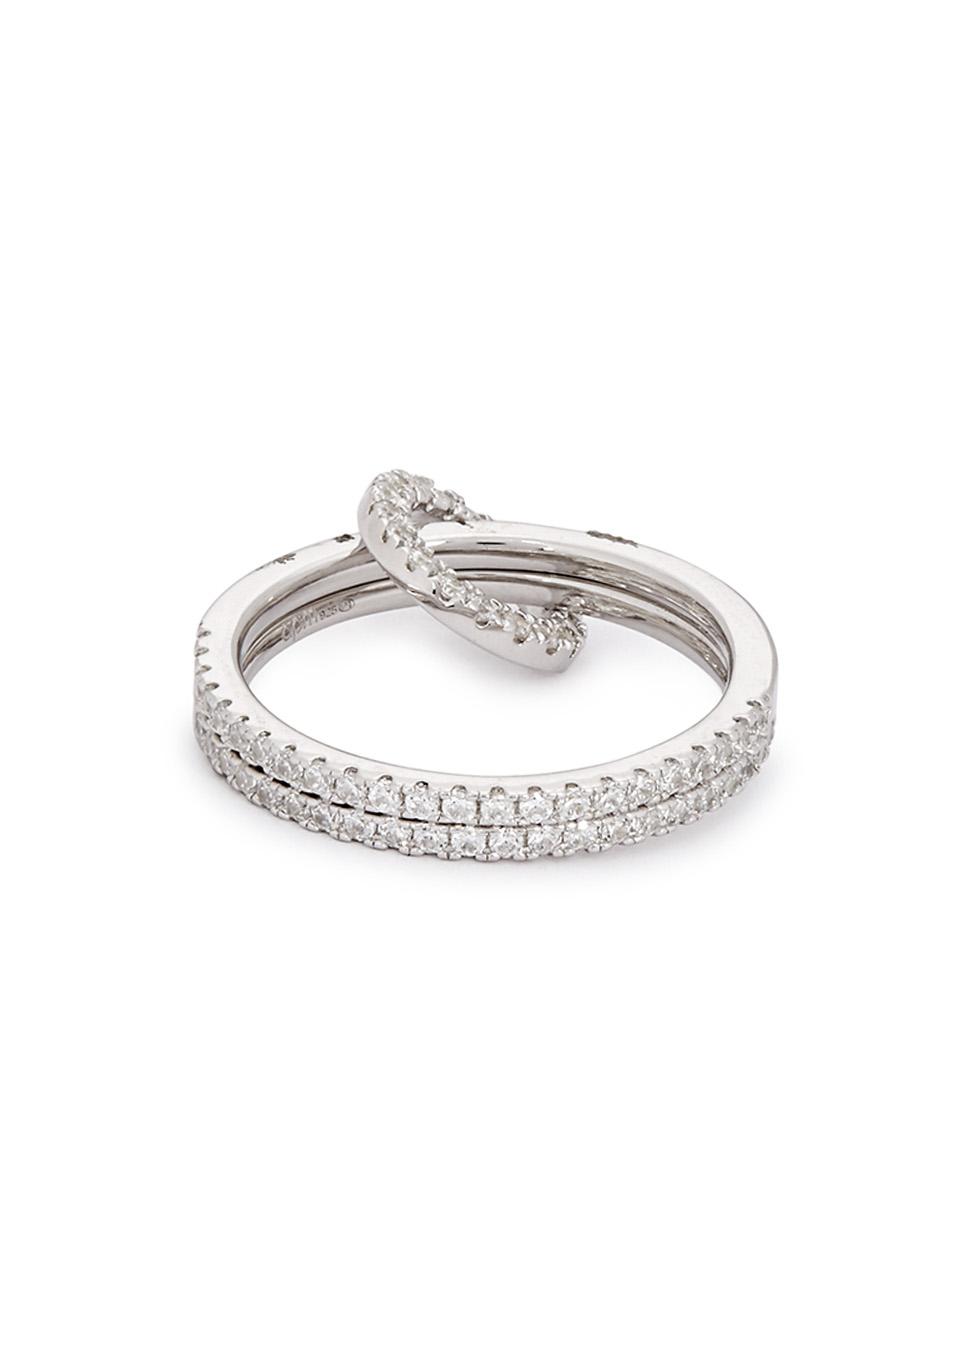 Lyst - Apm Monaco Crystal-embellished Double Sterling Silver Ring in ...